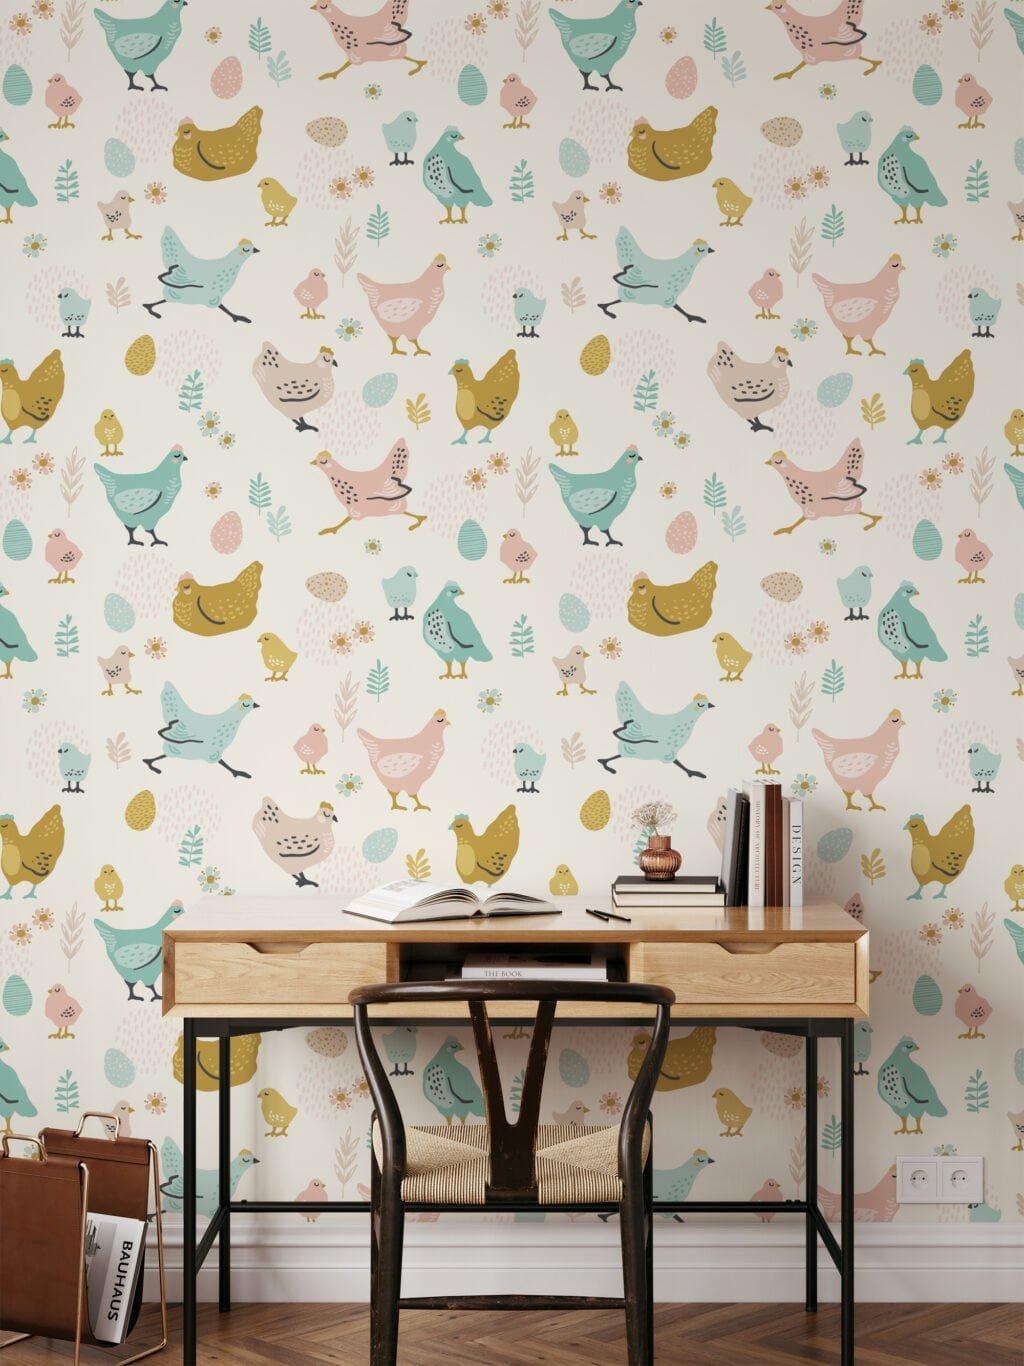 Cute Farm Animal Chickens With Eggs Illustration Wallpaper, Whimsical Nursery Room Peel & Stick Wall Mural